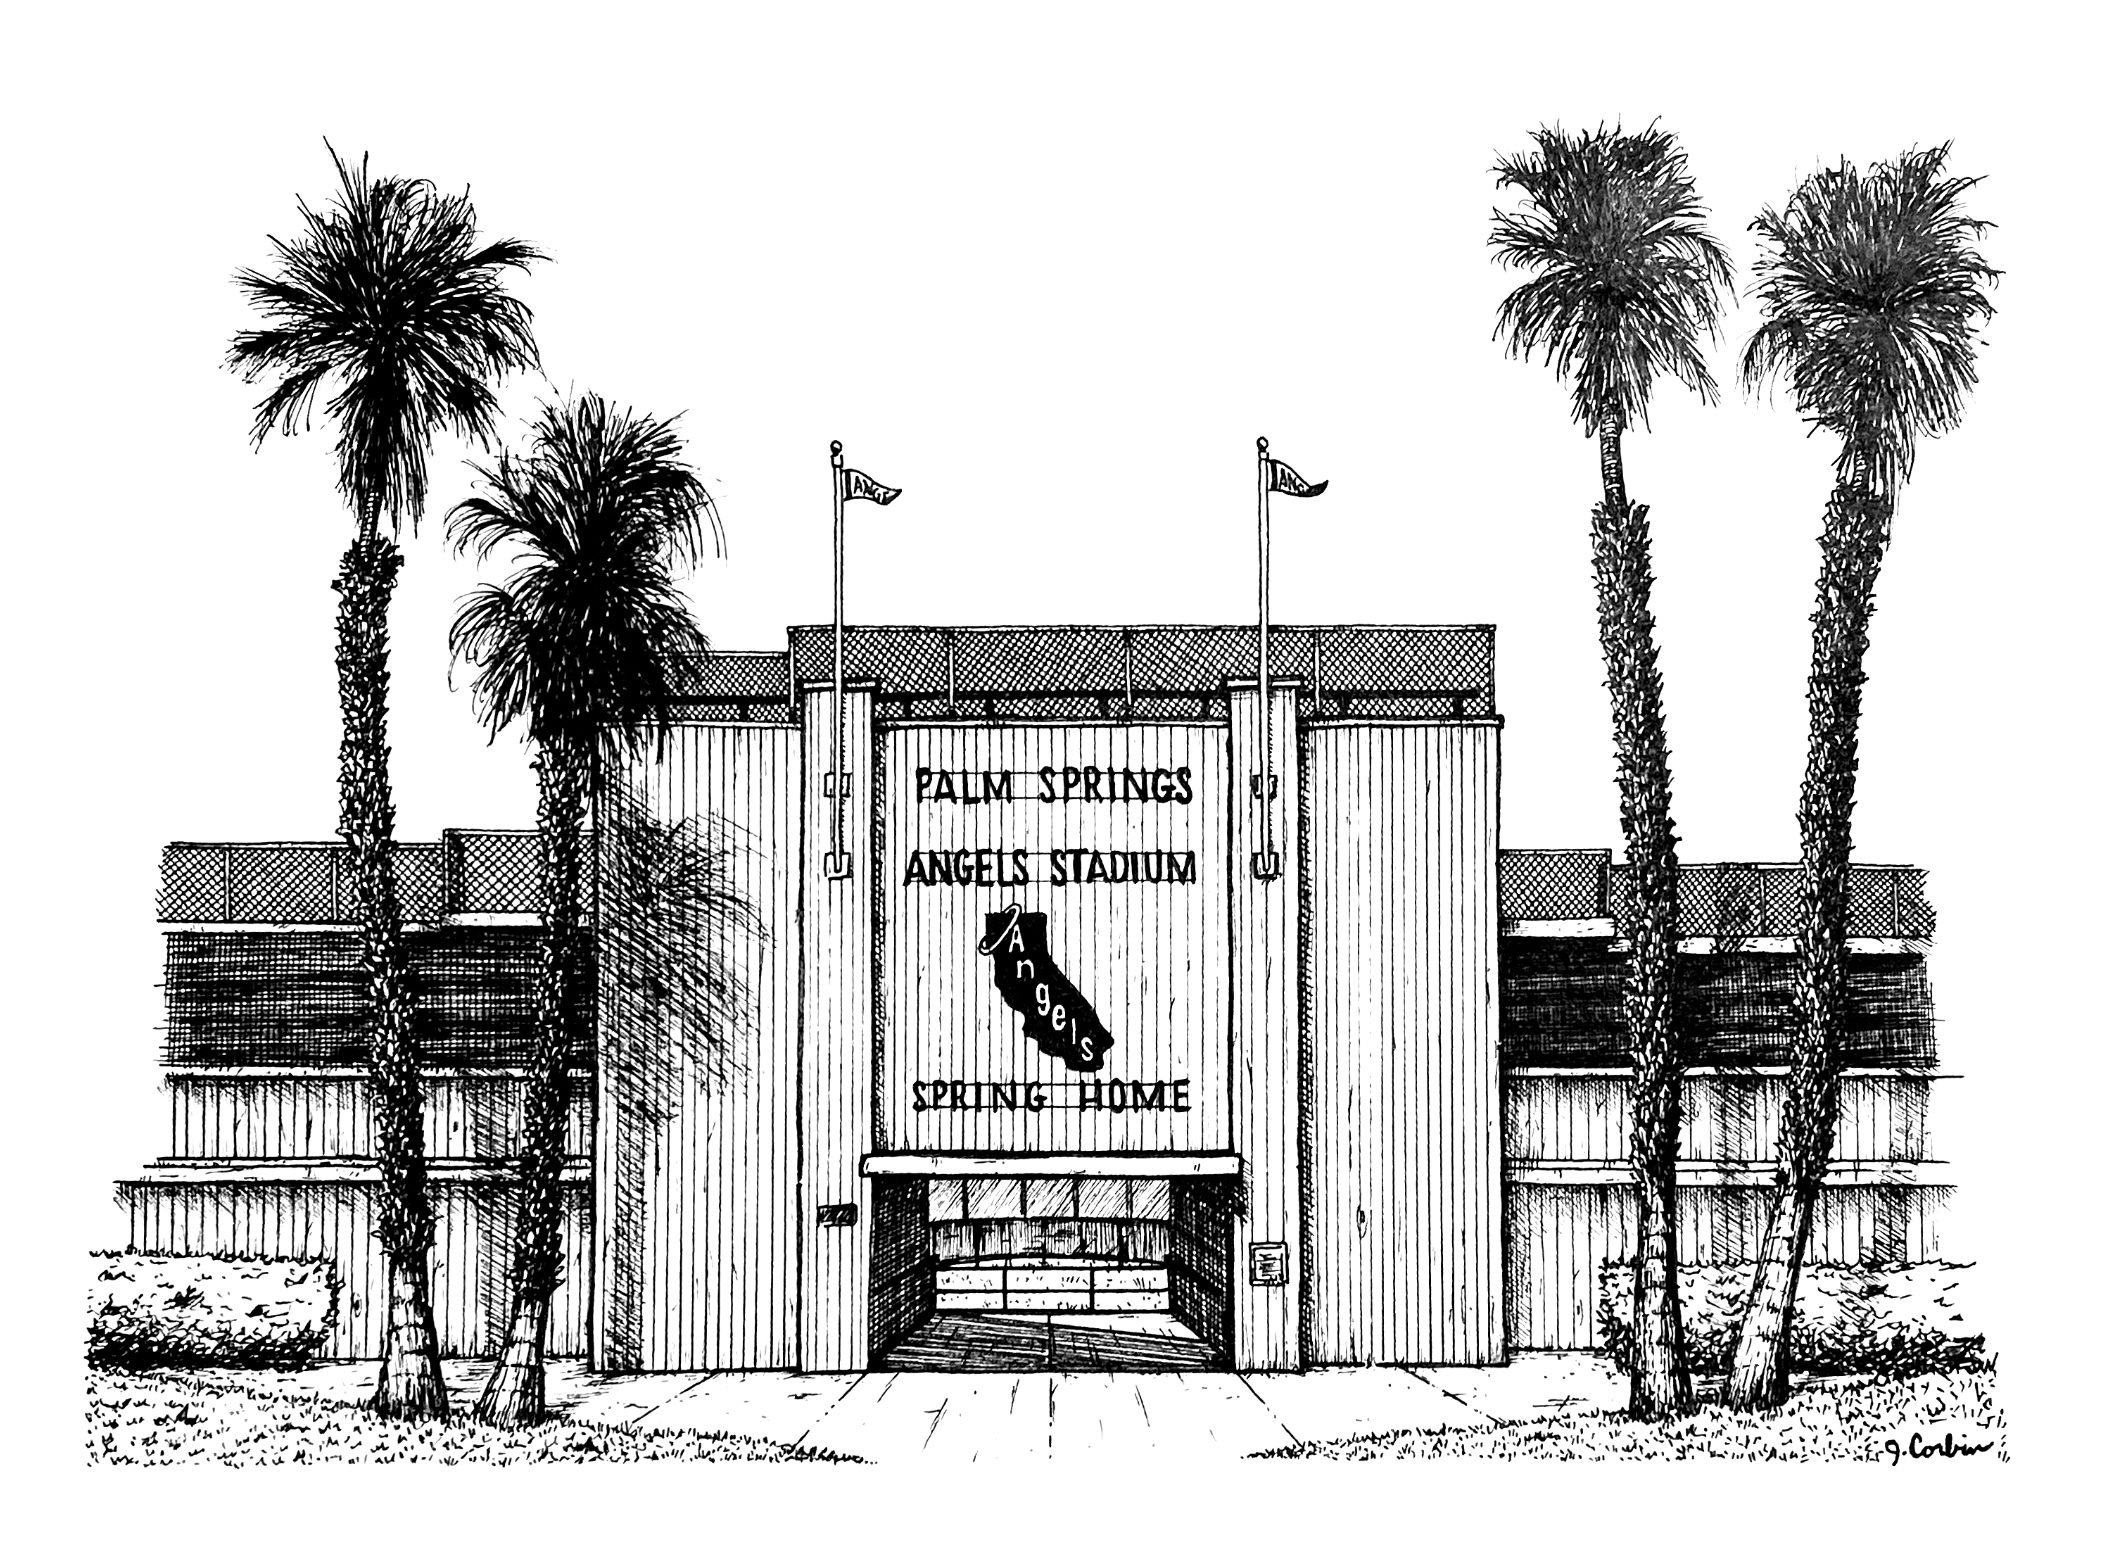 A black and white ink illustration of Angels Stadium in Palm Springs, California